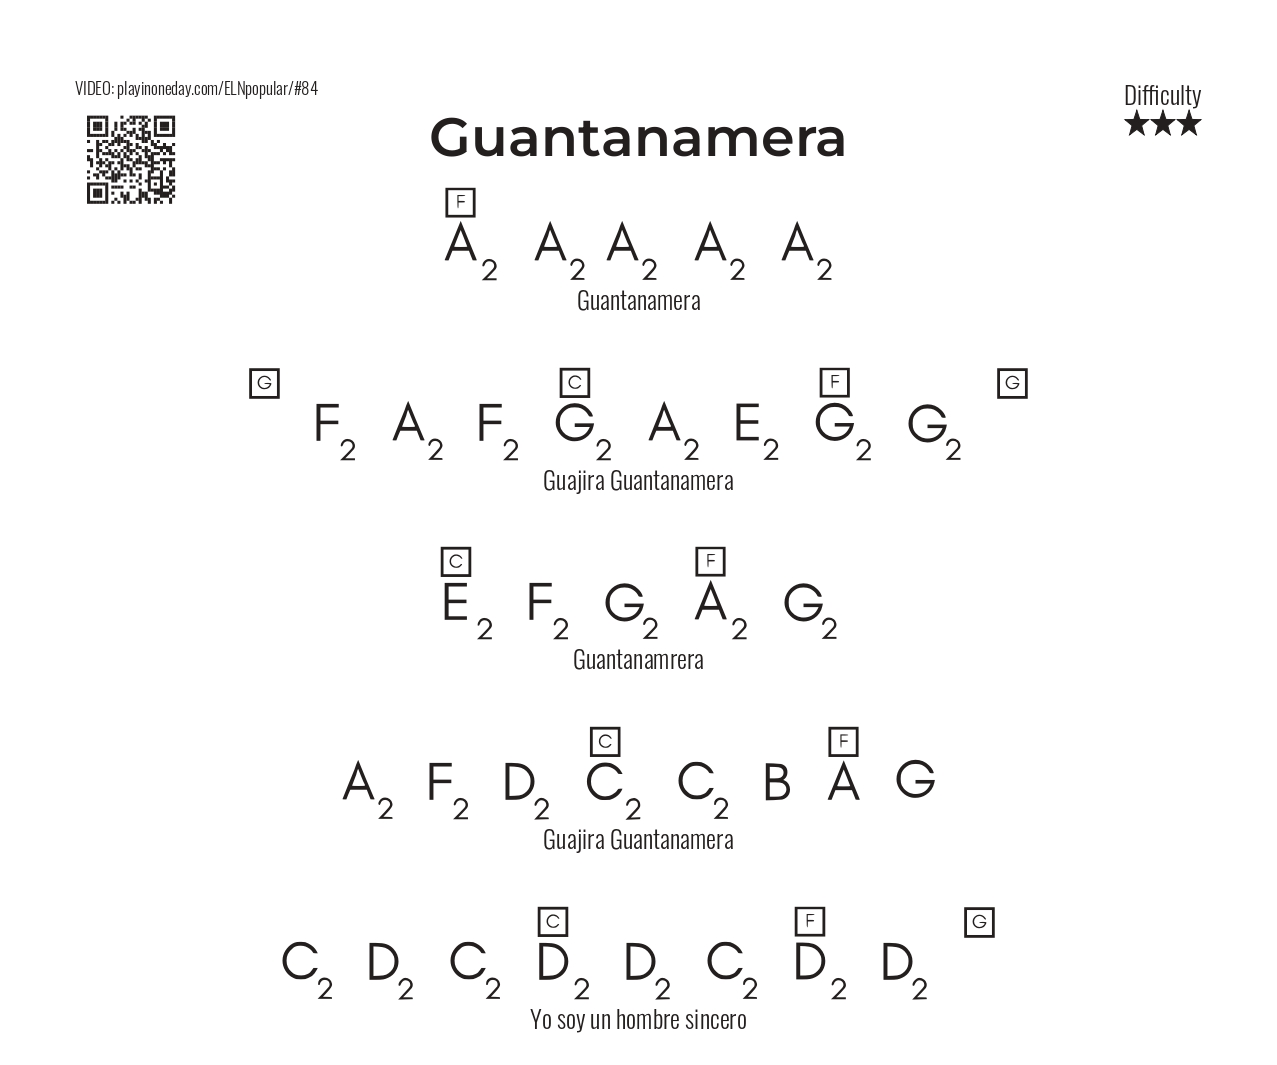 Guantanamera letter notes song